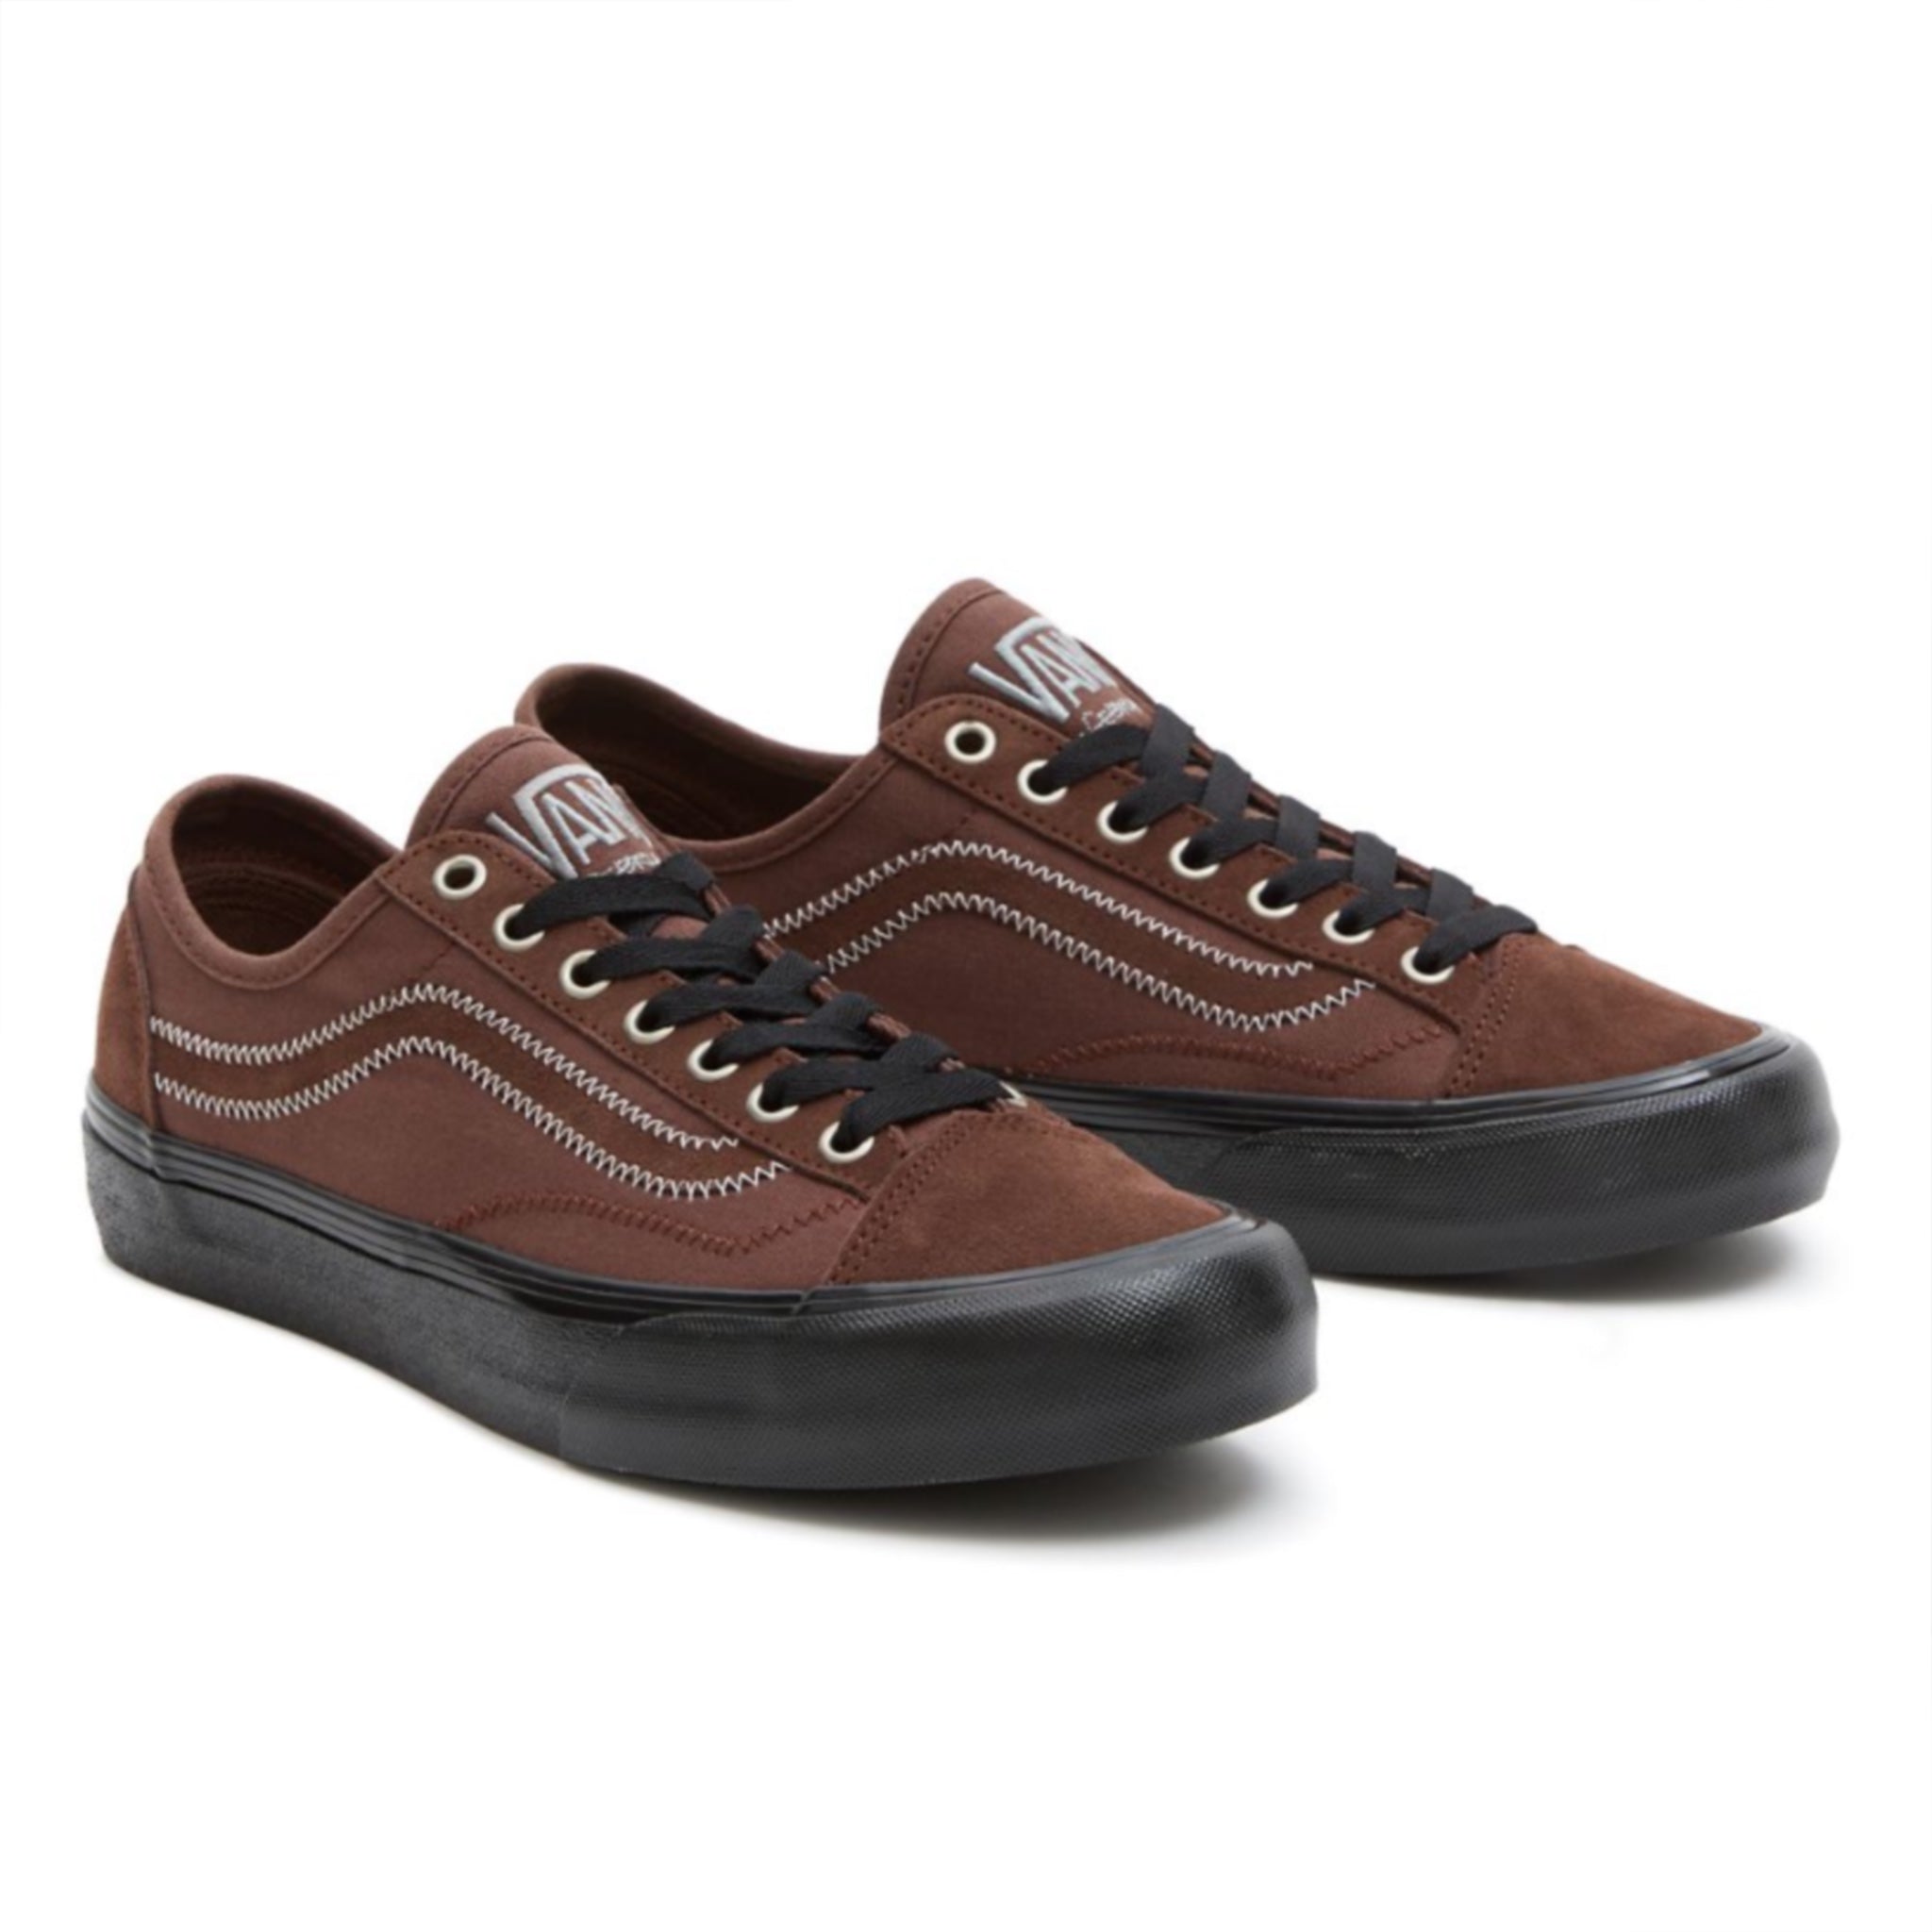 Vans Style 36 VR3 SF Shoes X Mikey February - Dark Brown / Black